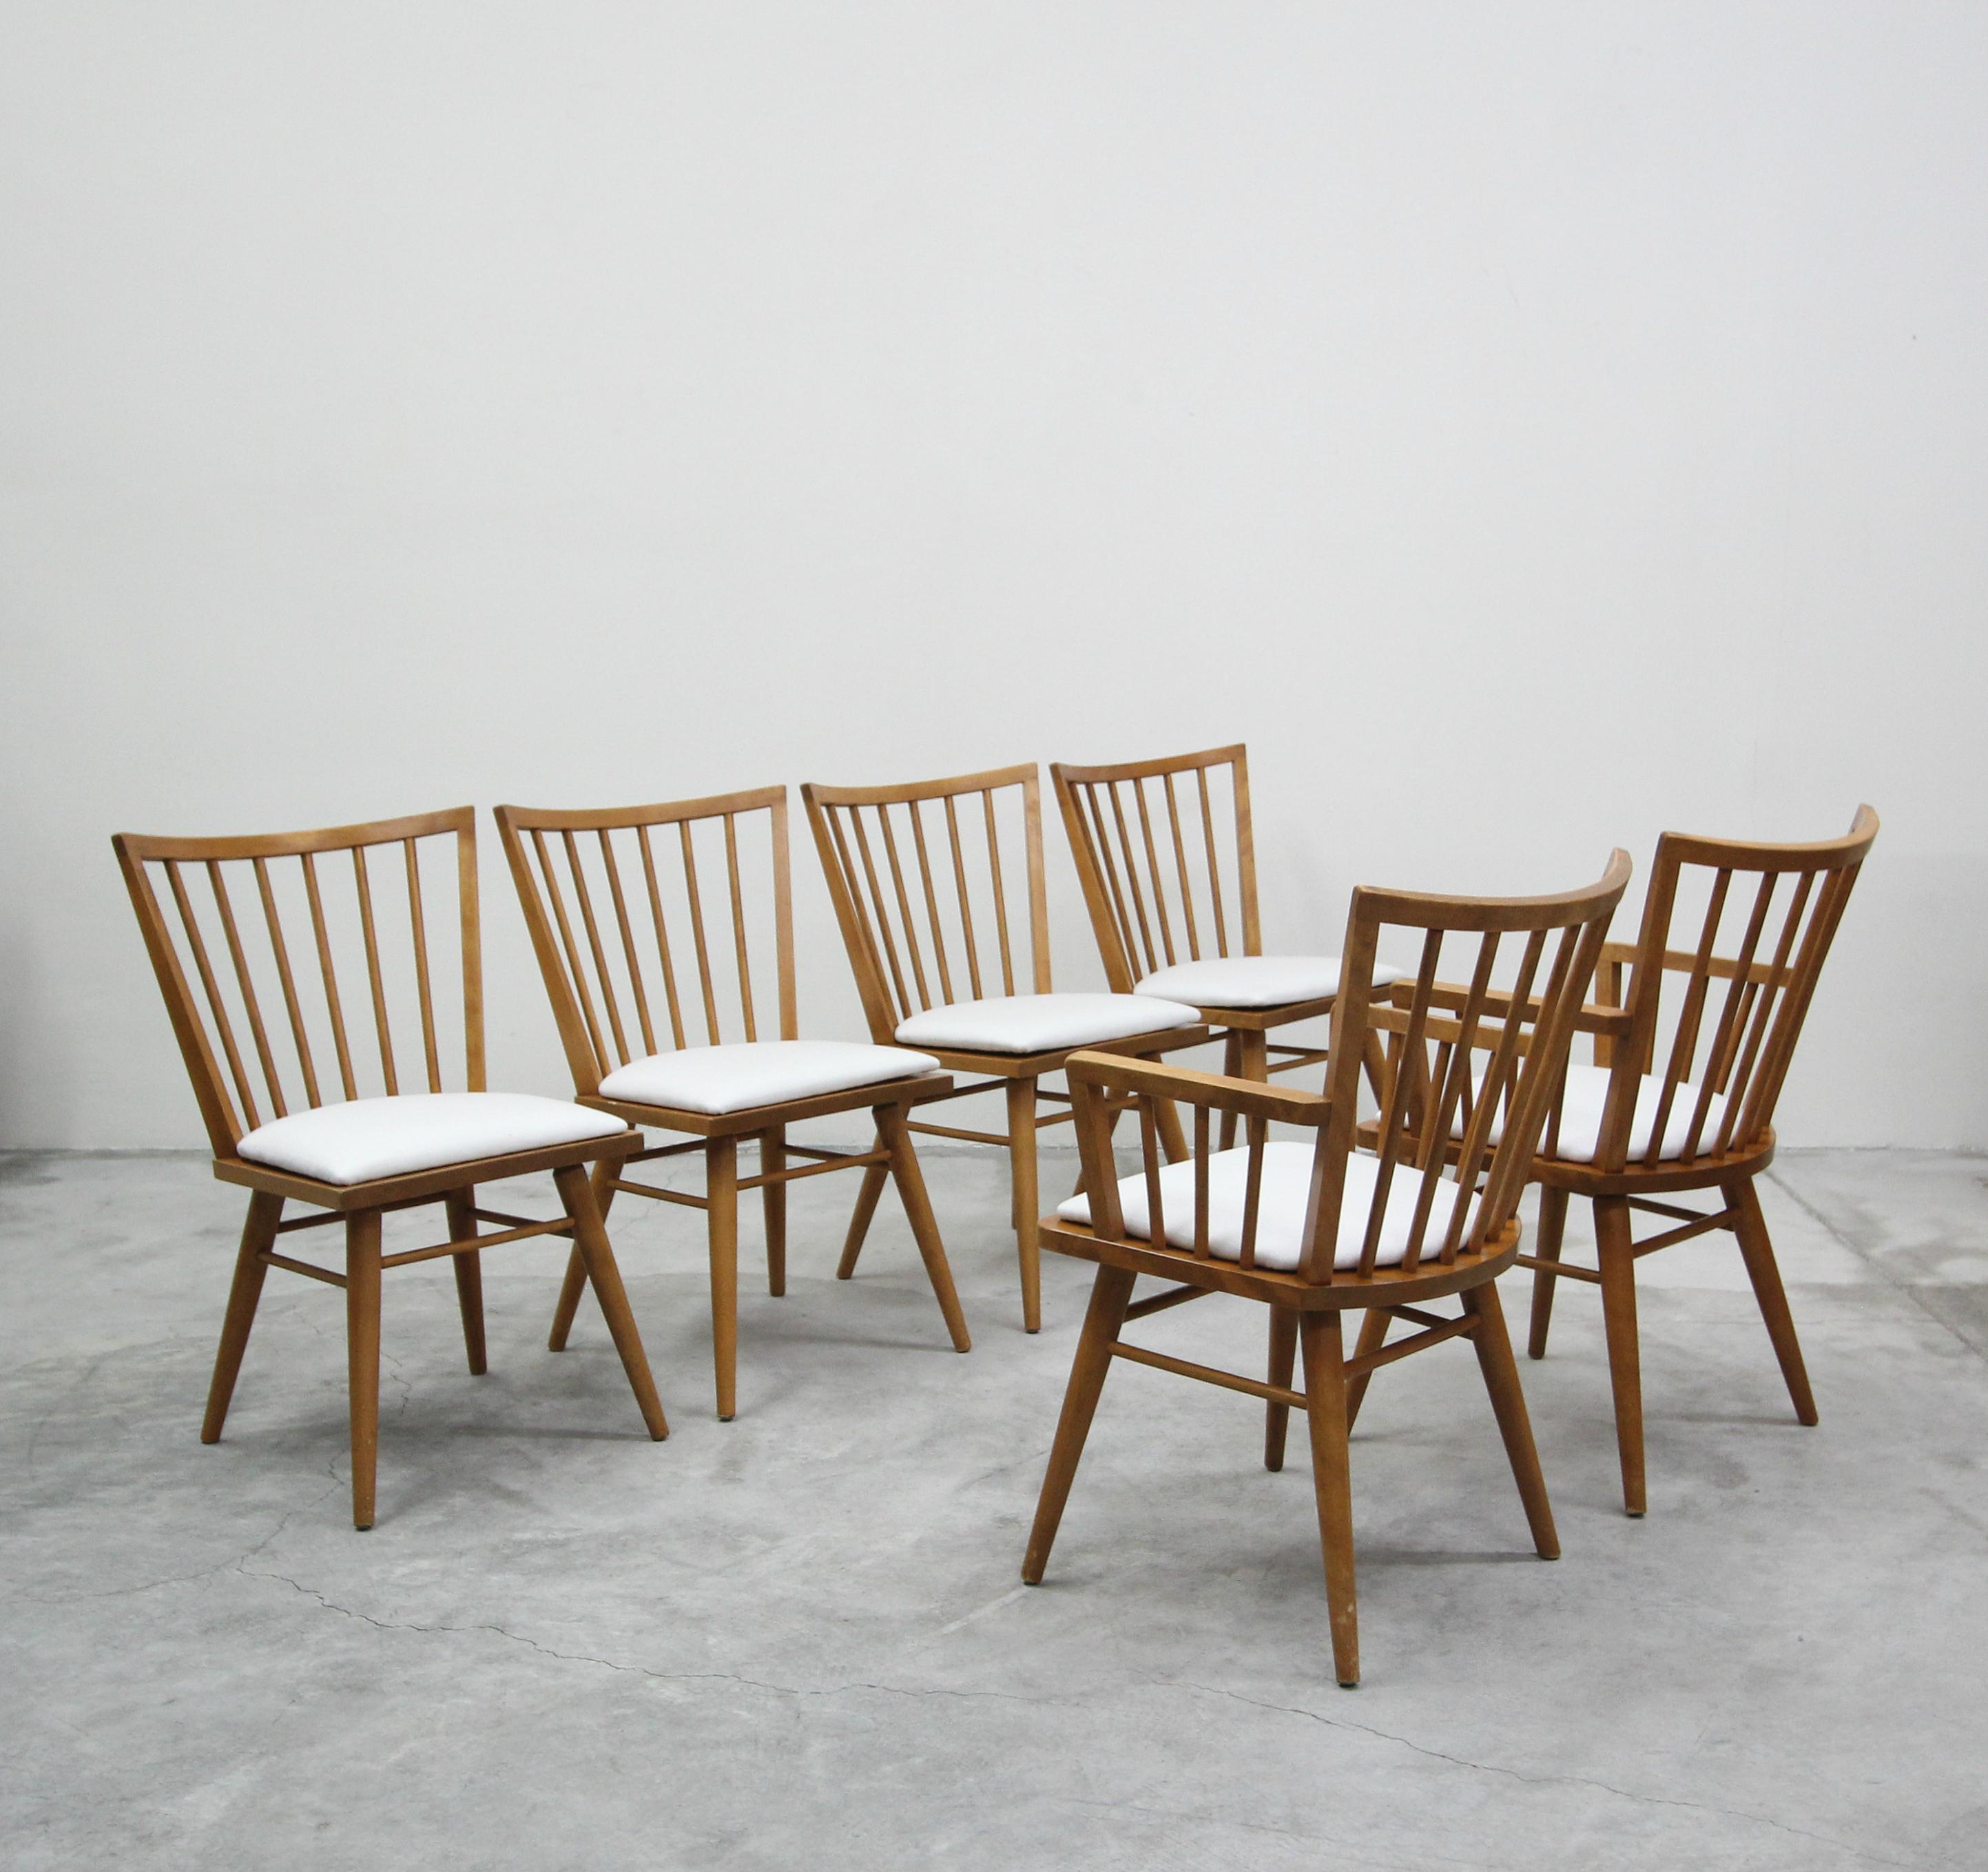 Beautiful set of six midcentury bentwood dining chairs by Conant Ball, designed by Leslie Diamond. These chairs have a very clean, Minimalist design and their solid, maple construction, makes them stylish and durable.

Chairs are in excellent